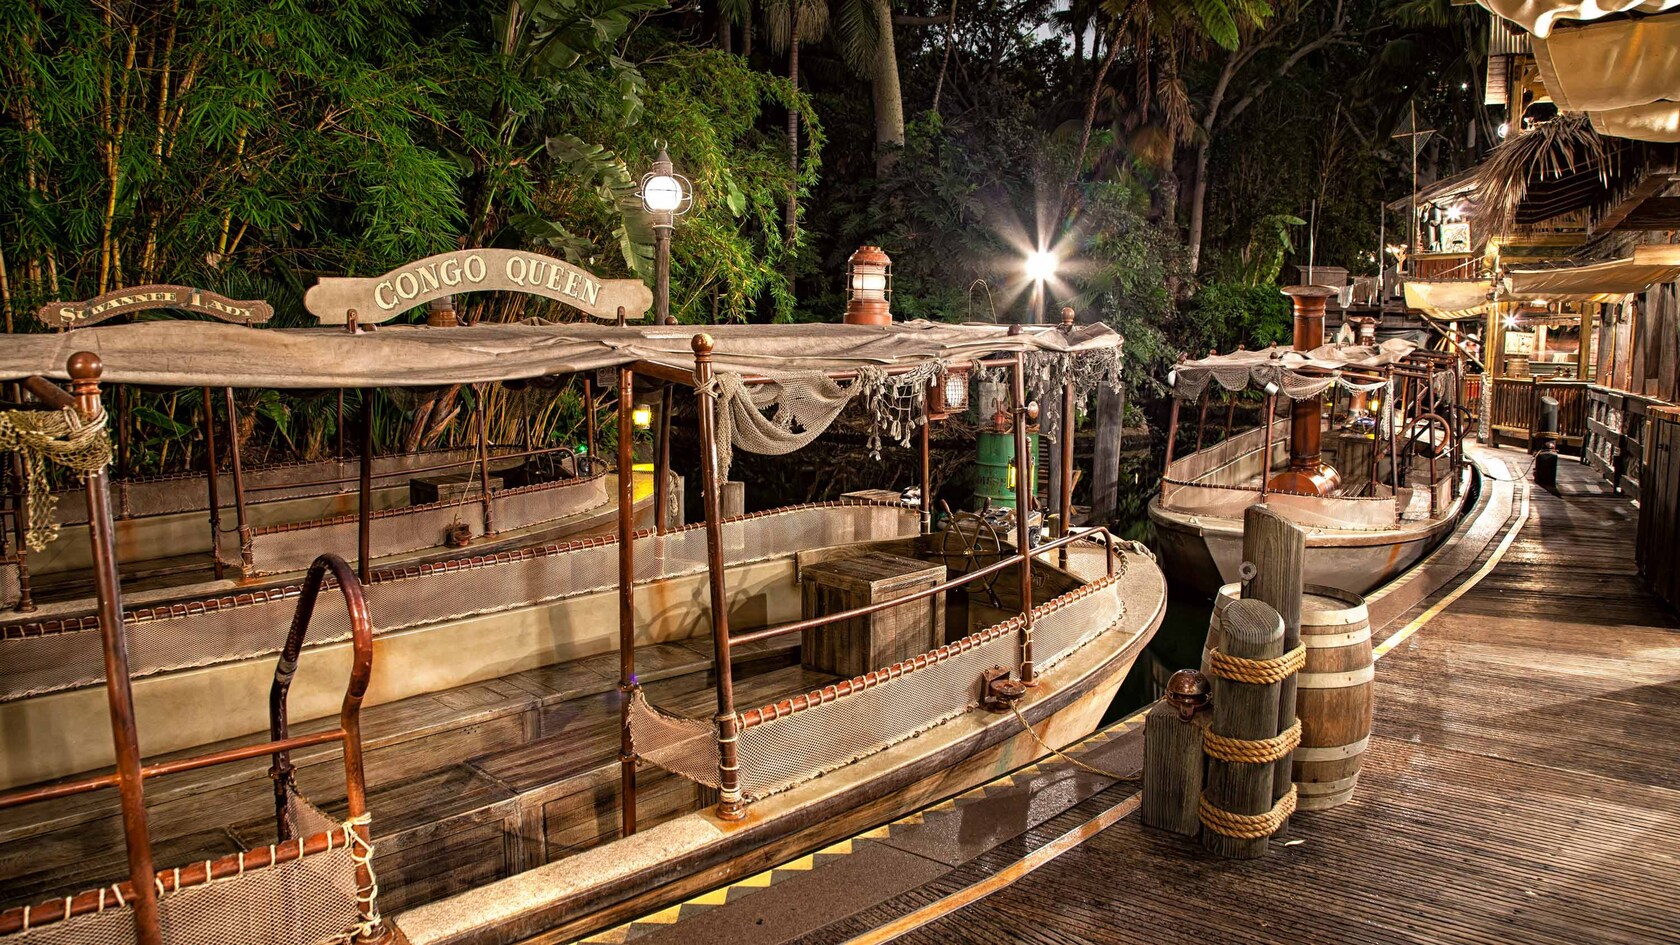 The Congo Queen, a wooden riverboat, moored to a pier with a jungle and huts